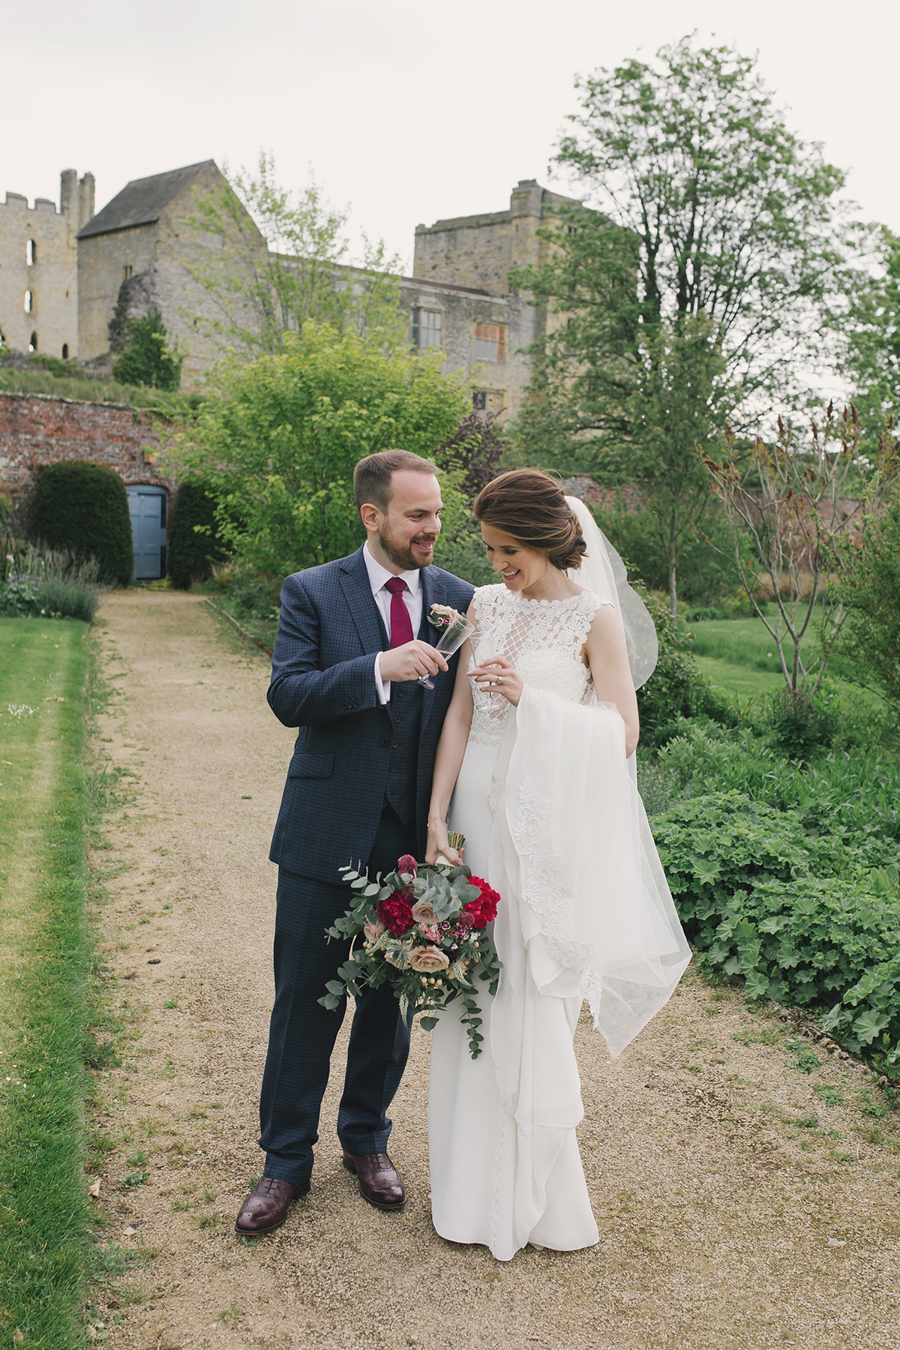 A beautiful quintessentially English wedding in Helmsley with images by Lissa Alexandra Photography (24)